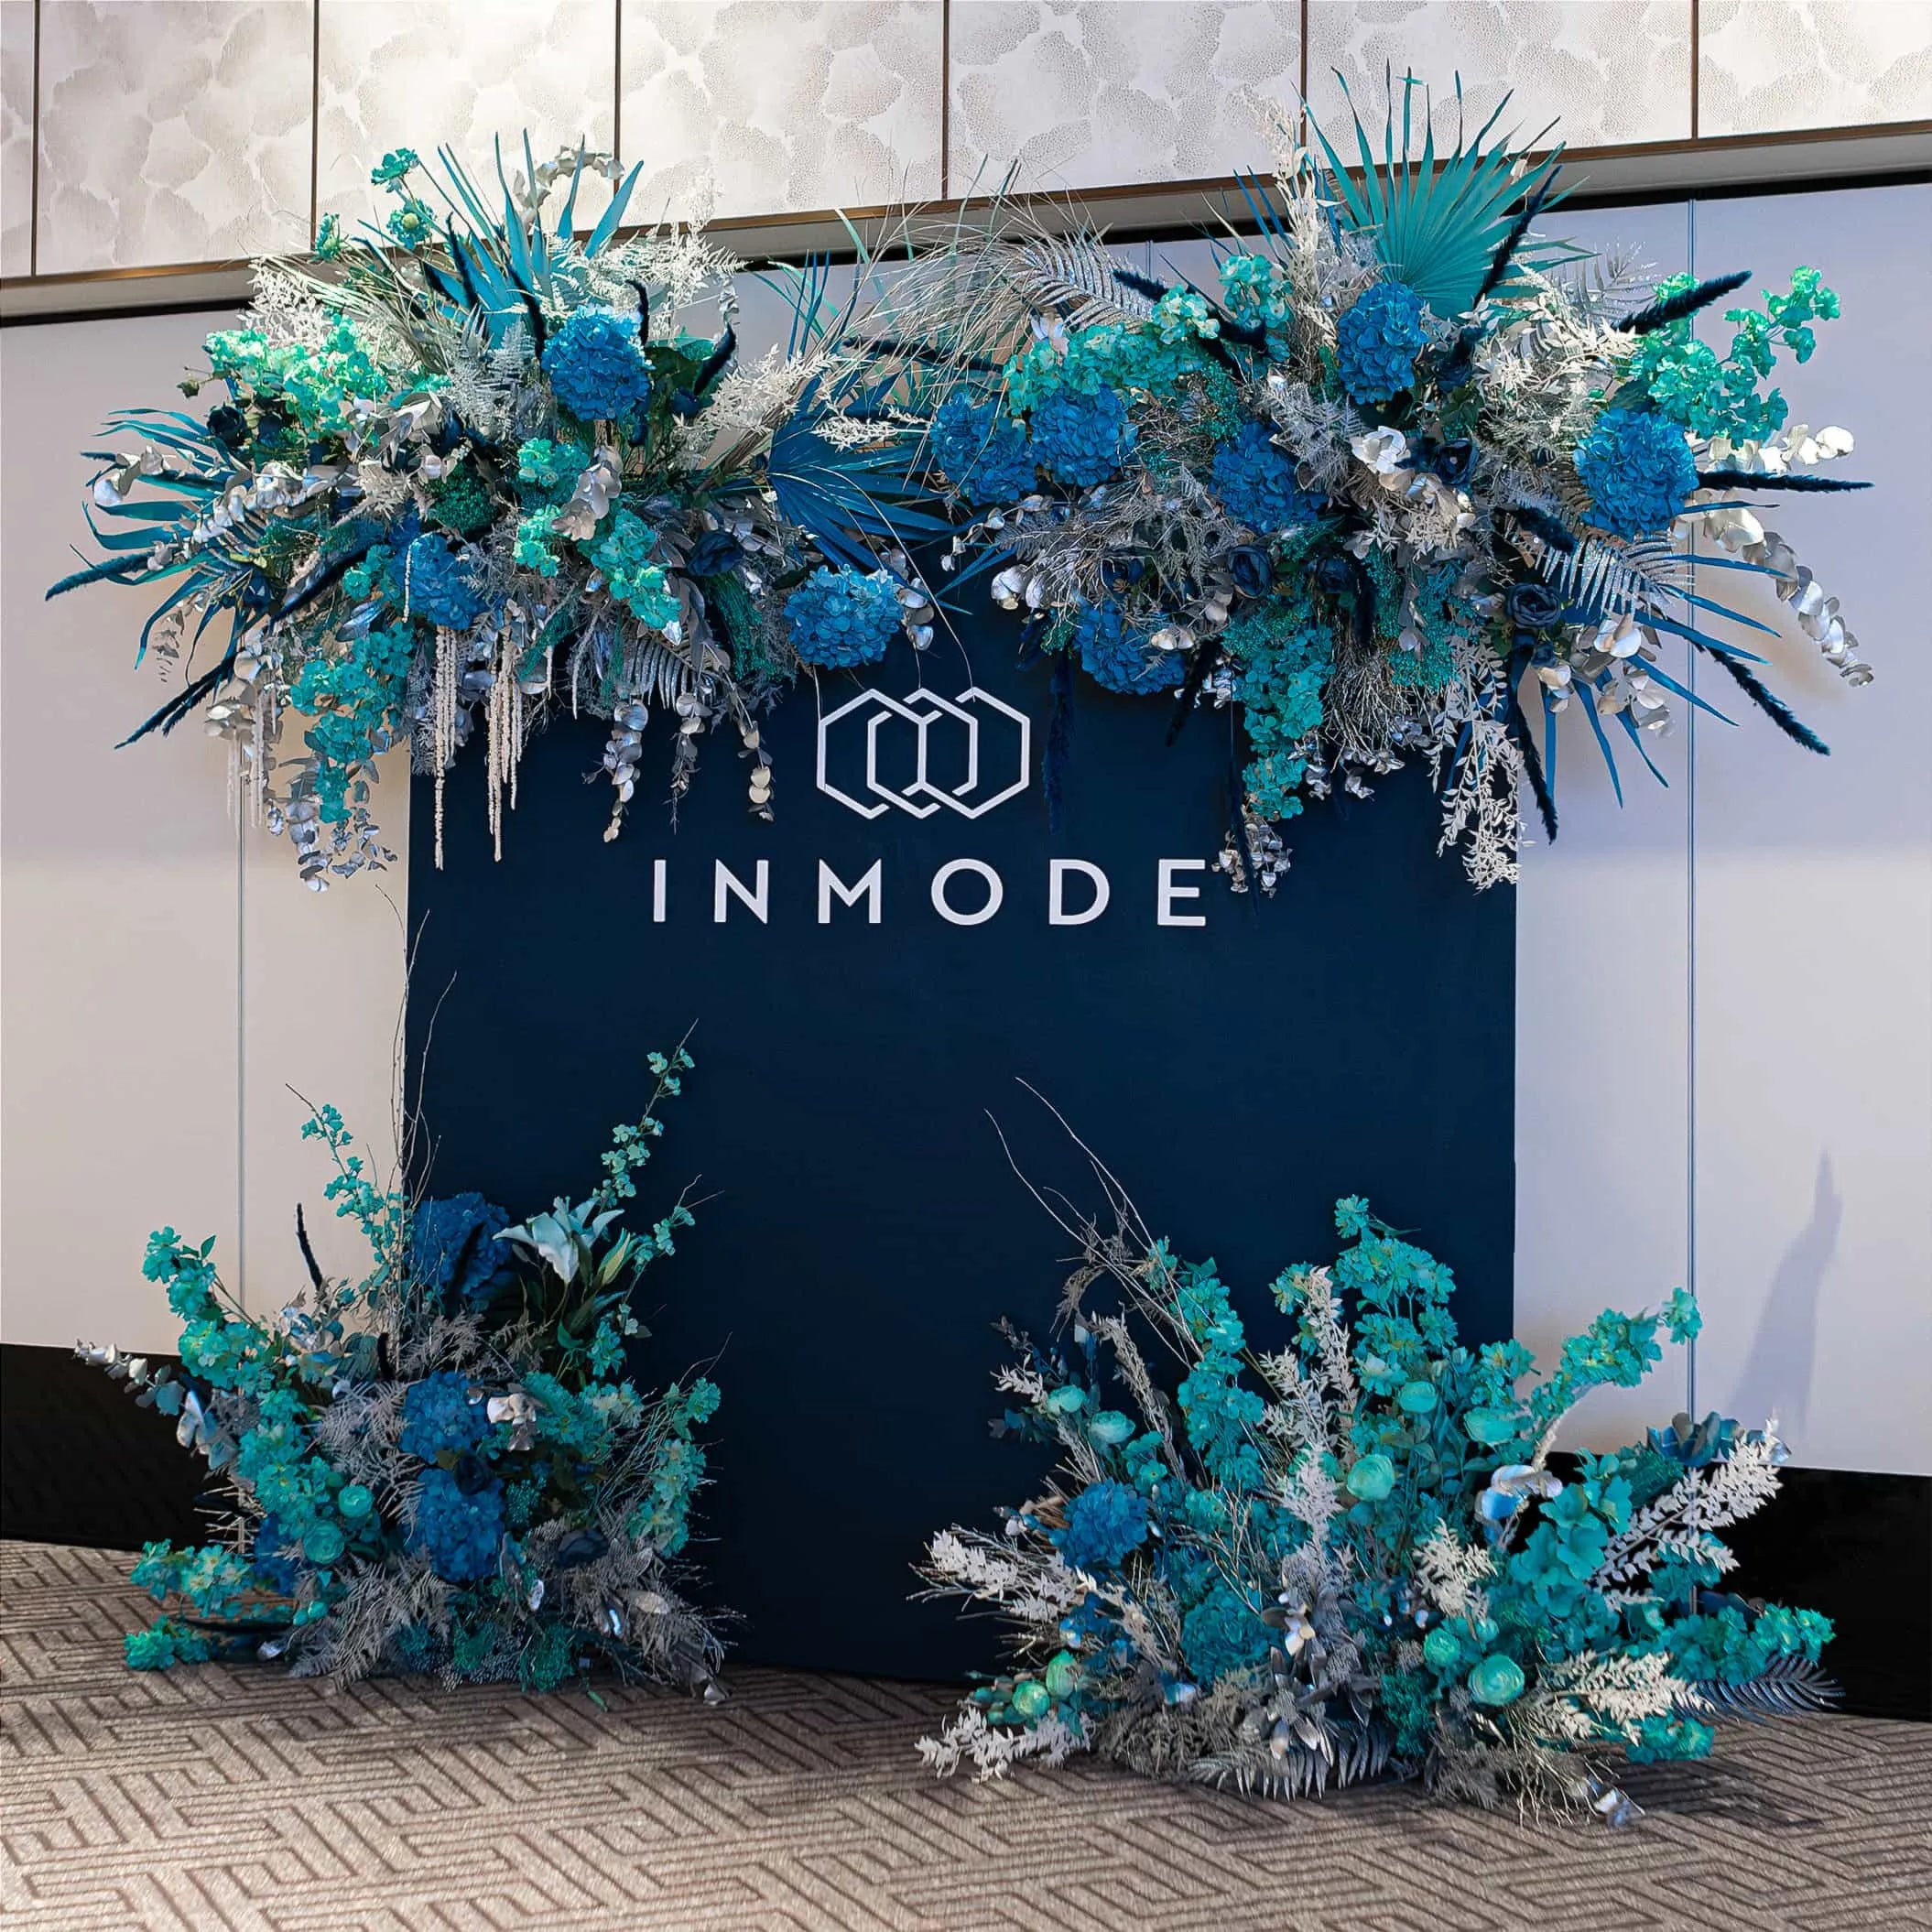 Elegant floral arrangement in blue, teal, and silver hues crowning a dark backdrop with the INMODE logo, creating a festive atmosphere in a contemporary setting with textured wall panels.